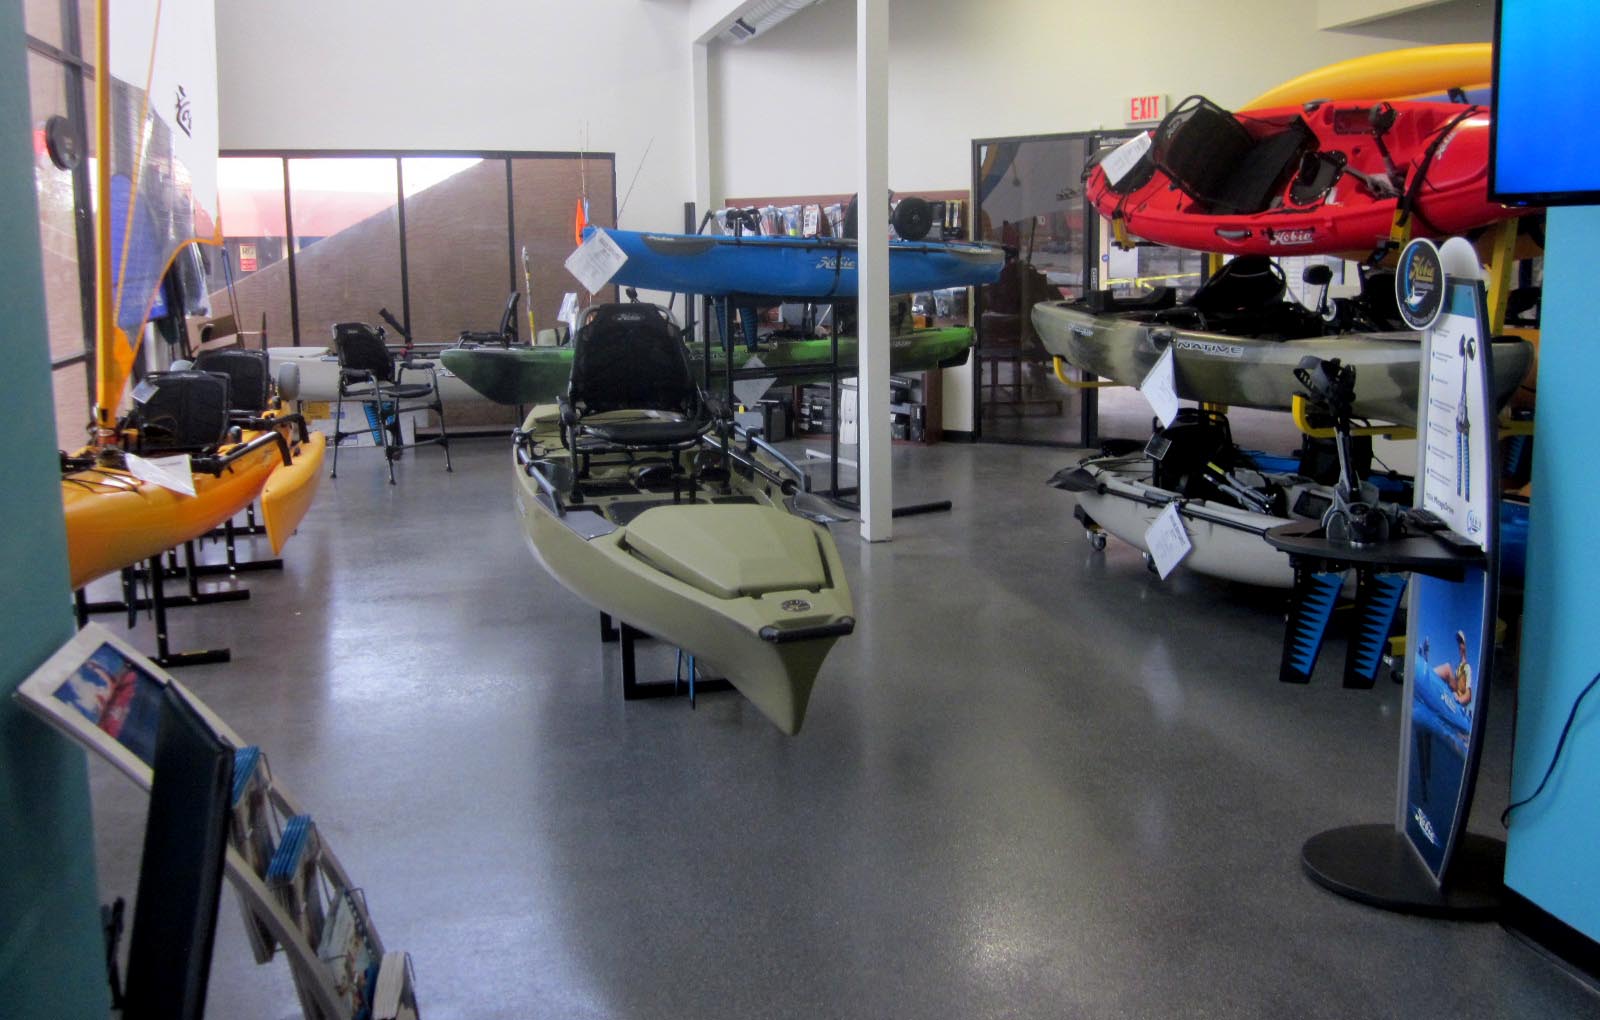 Hobie Kayaks for sale or rent in Tempe